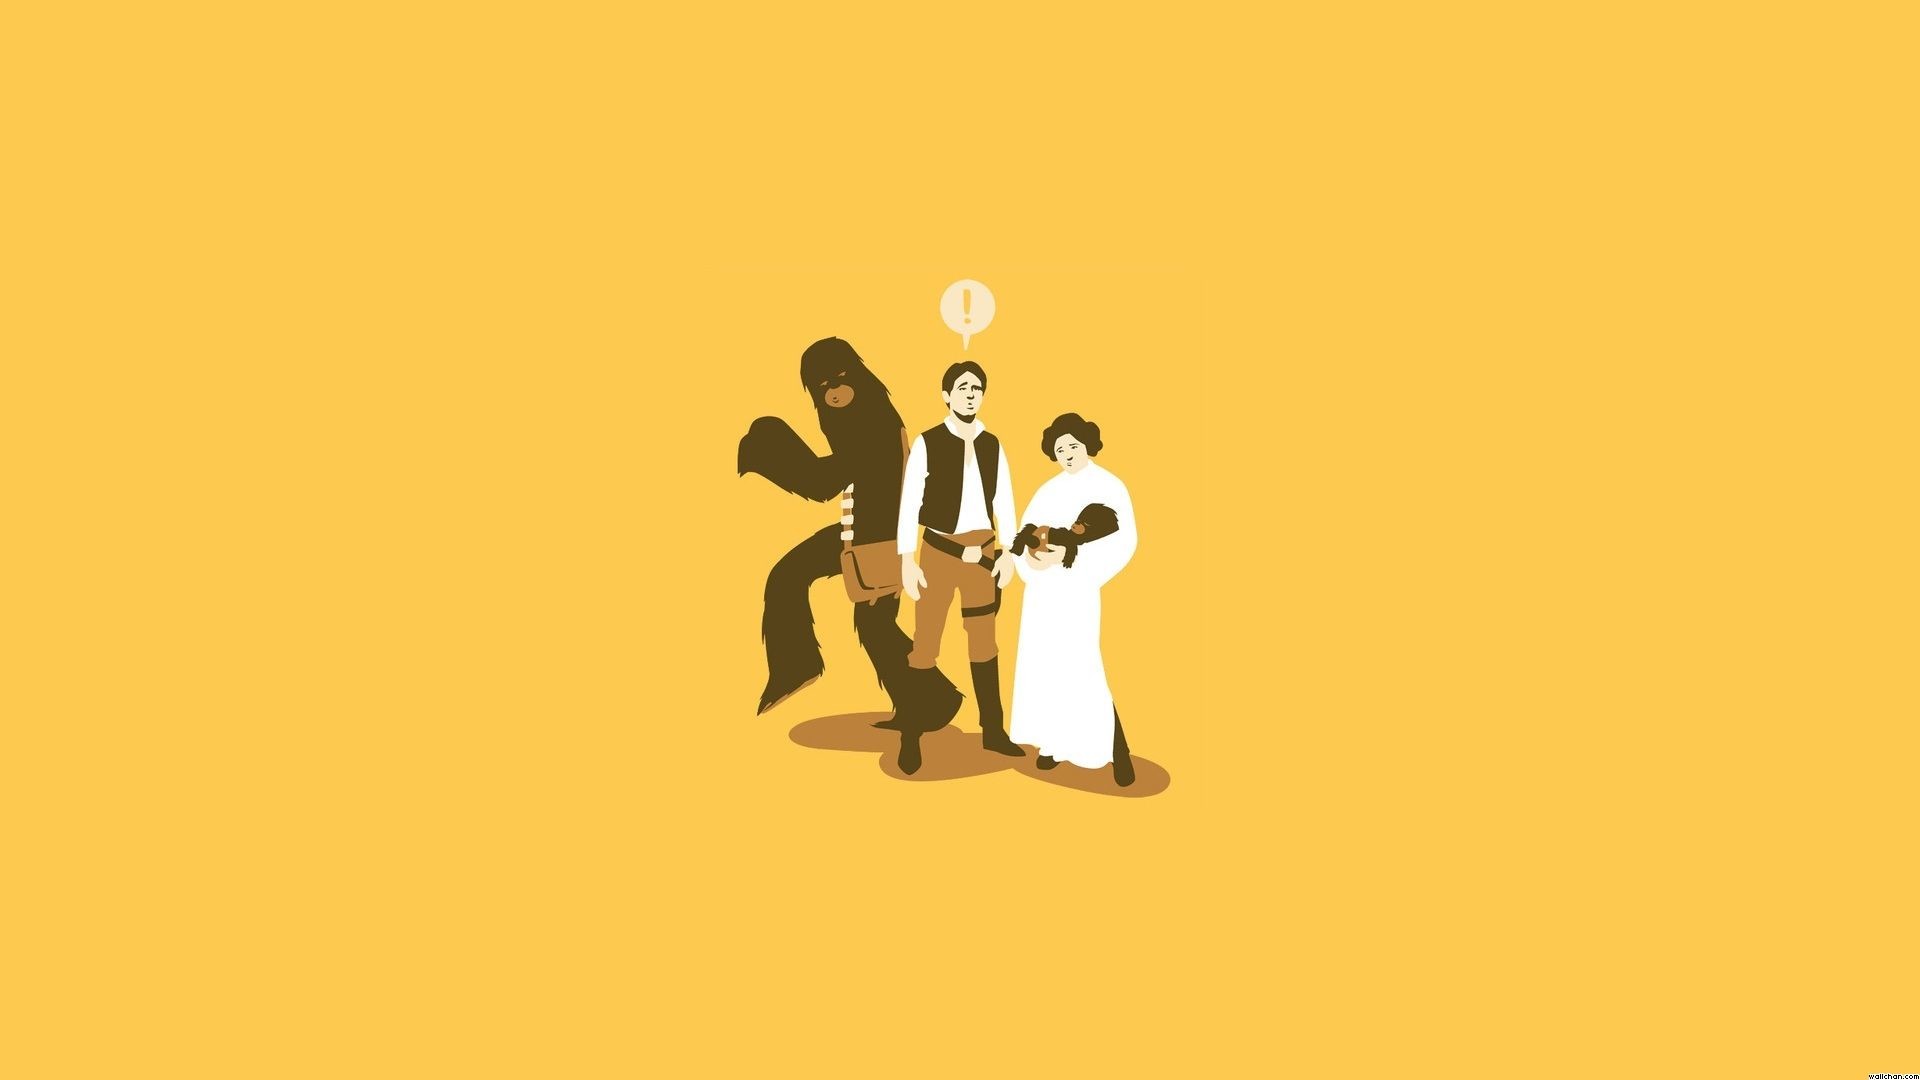 A Pretty Sweet Gallery of Star Wars HD Wallpaper for Your Desktop  Star  wars wallpaper, Animated wallpaper for pc, Computer wallpaper desktop  wallpapers